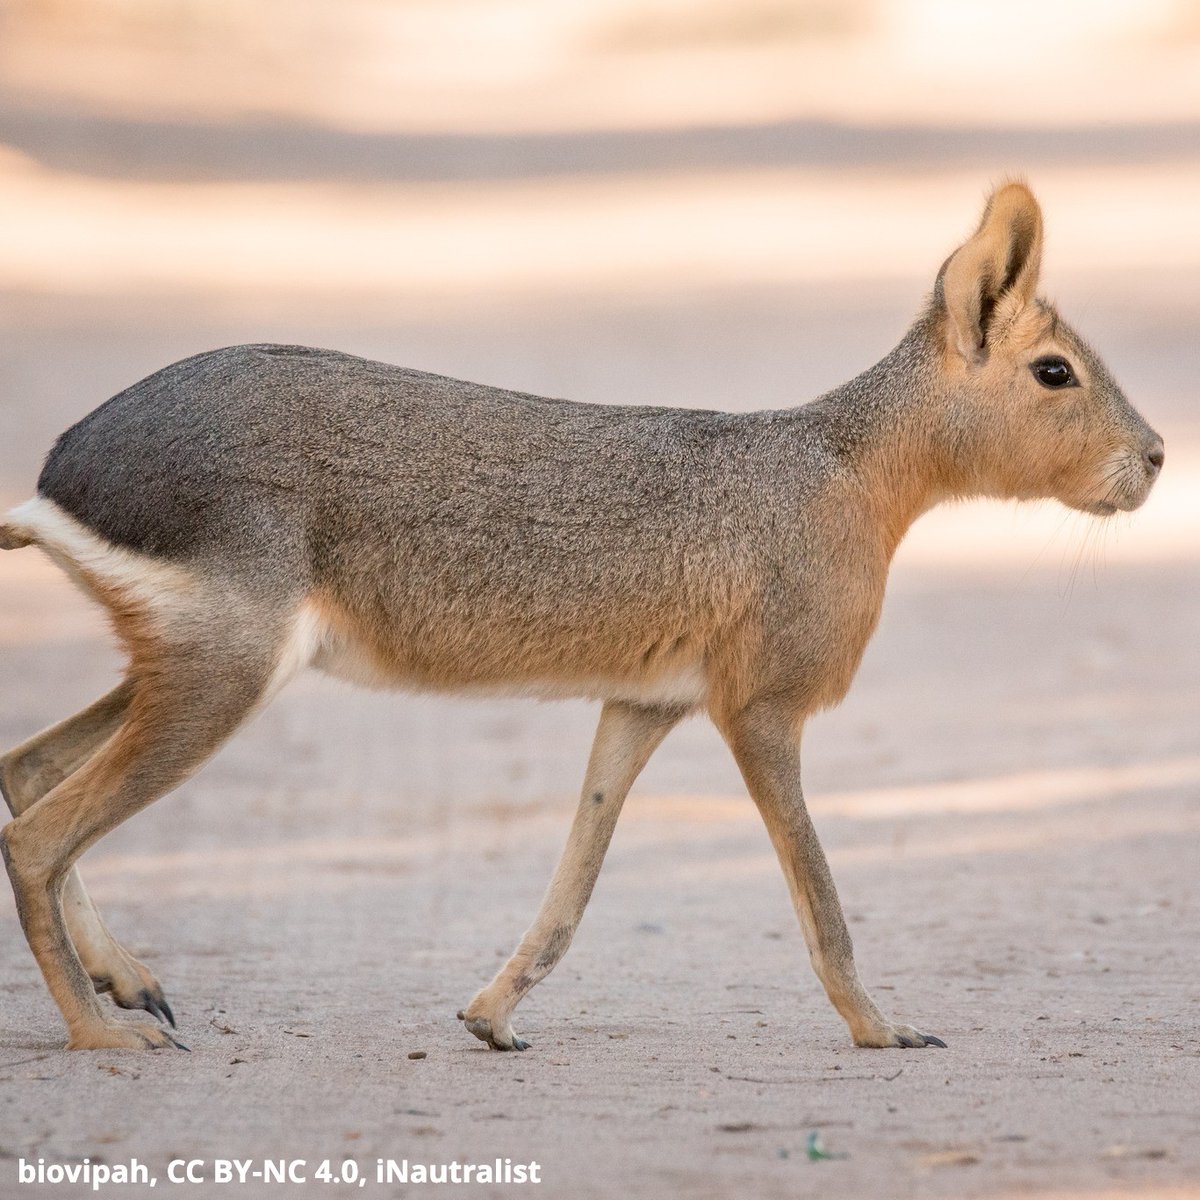 Is that a giant rabbit? 👀 Nope, it’s the Patagonian mara! Weighing ~35 lbs (15.9 kg), this long-legged rodent can outrun an Olympic sprinter—reaching speeds of ~45 mi (72 km) per hour! It inhabits open grasslands where it spends time basking in the Sun and foraging for food.